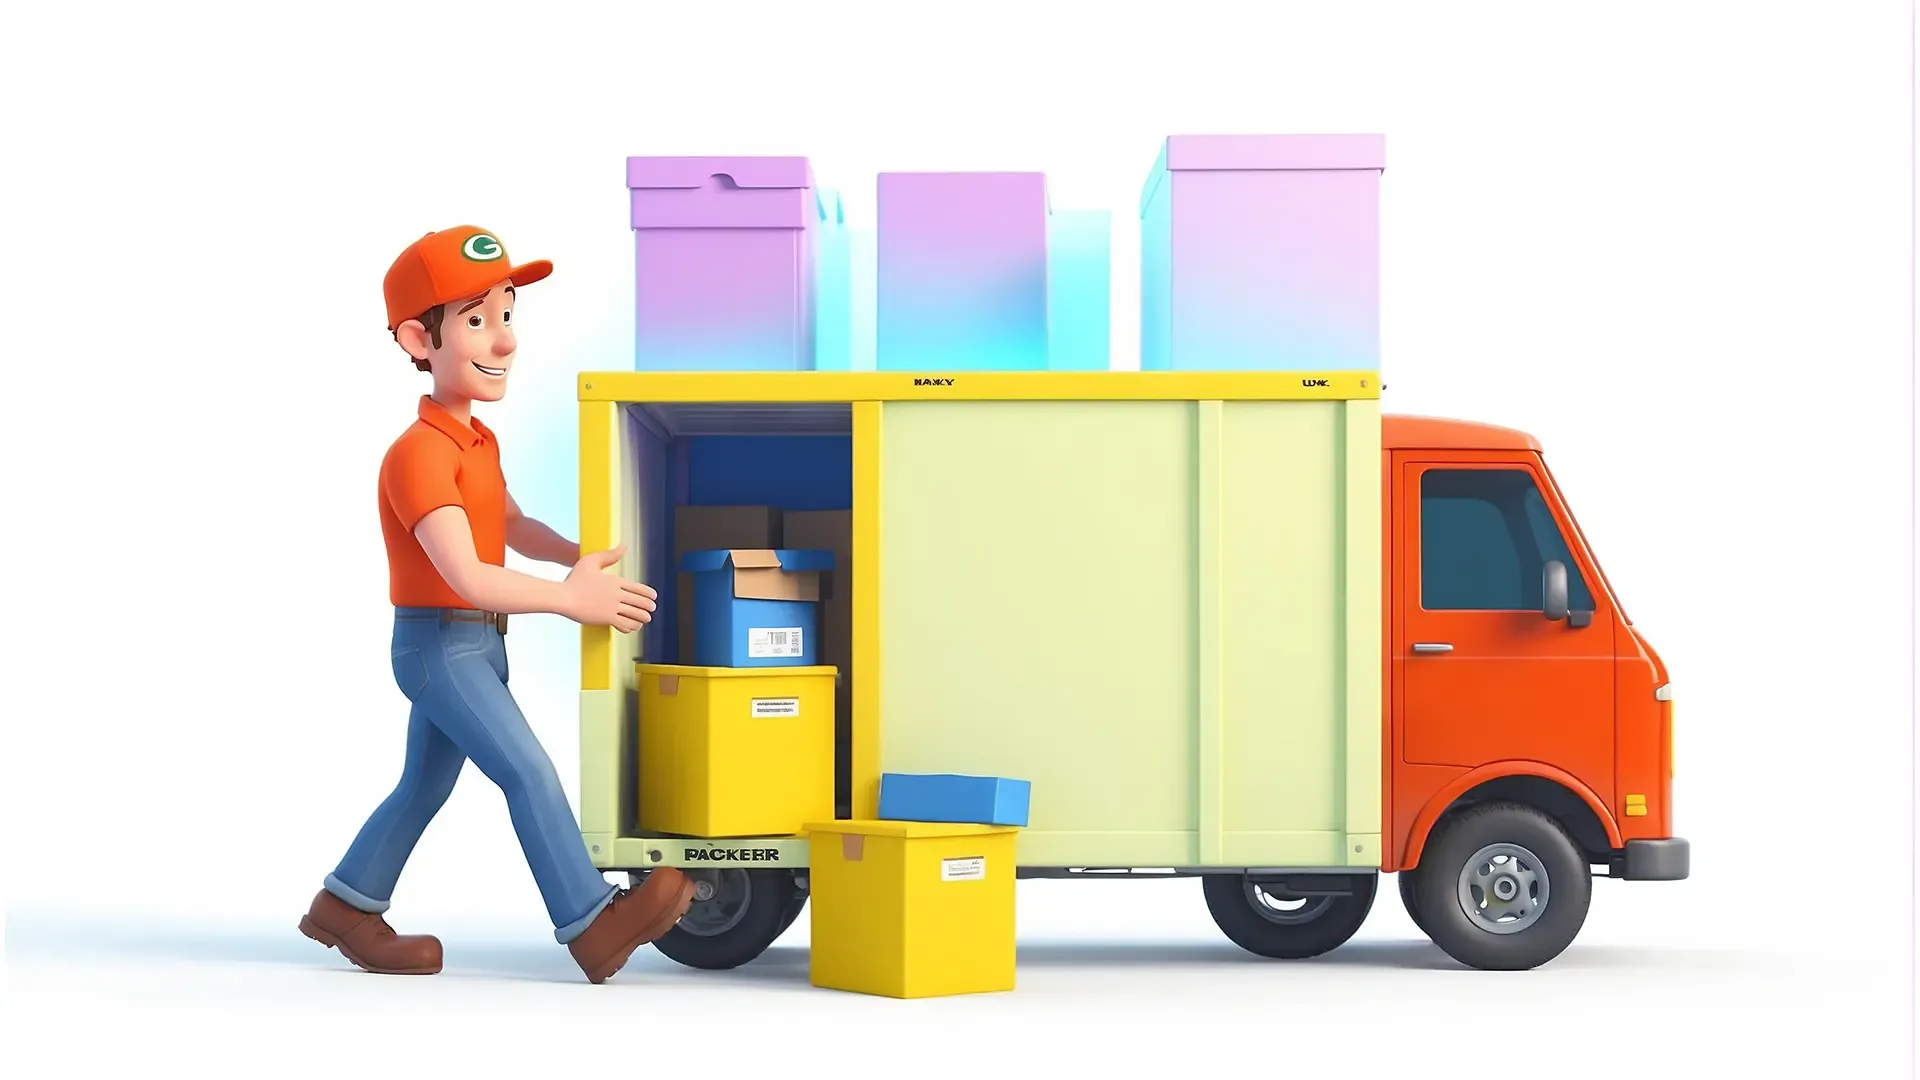 Courier Service Concept Delivery Boy 3D Character Illustration